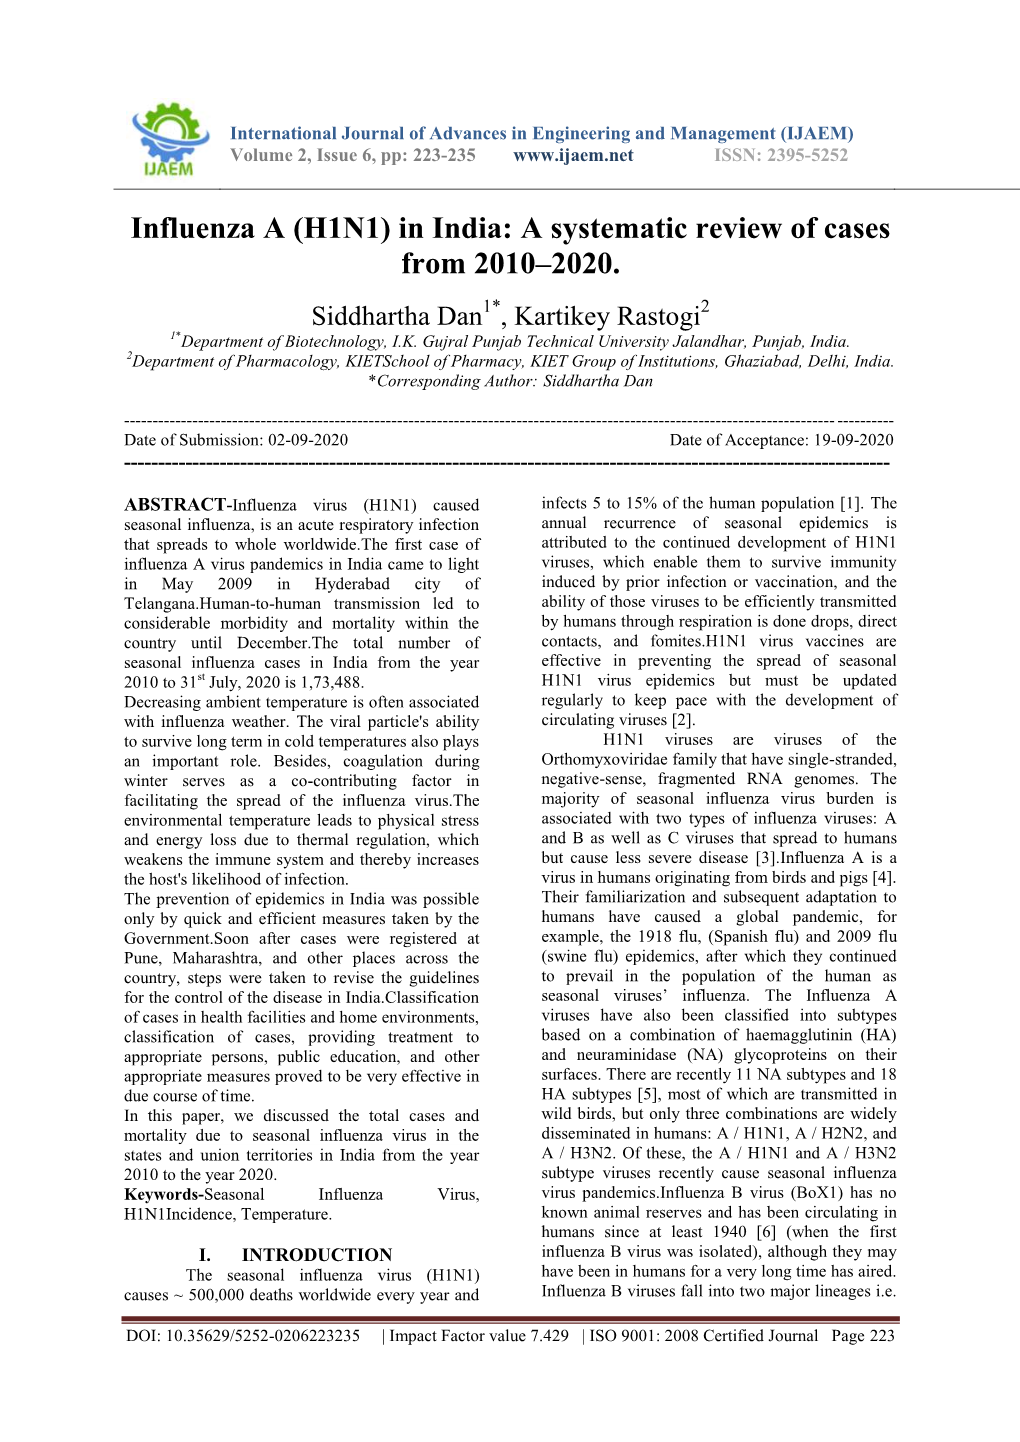 Influenza a (H1N1) in India: a Systematic Review of Cases from 2010–2020